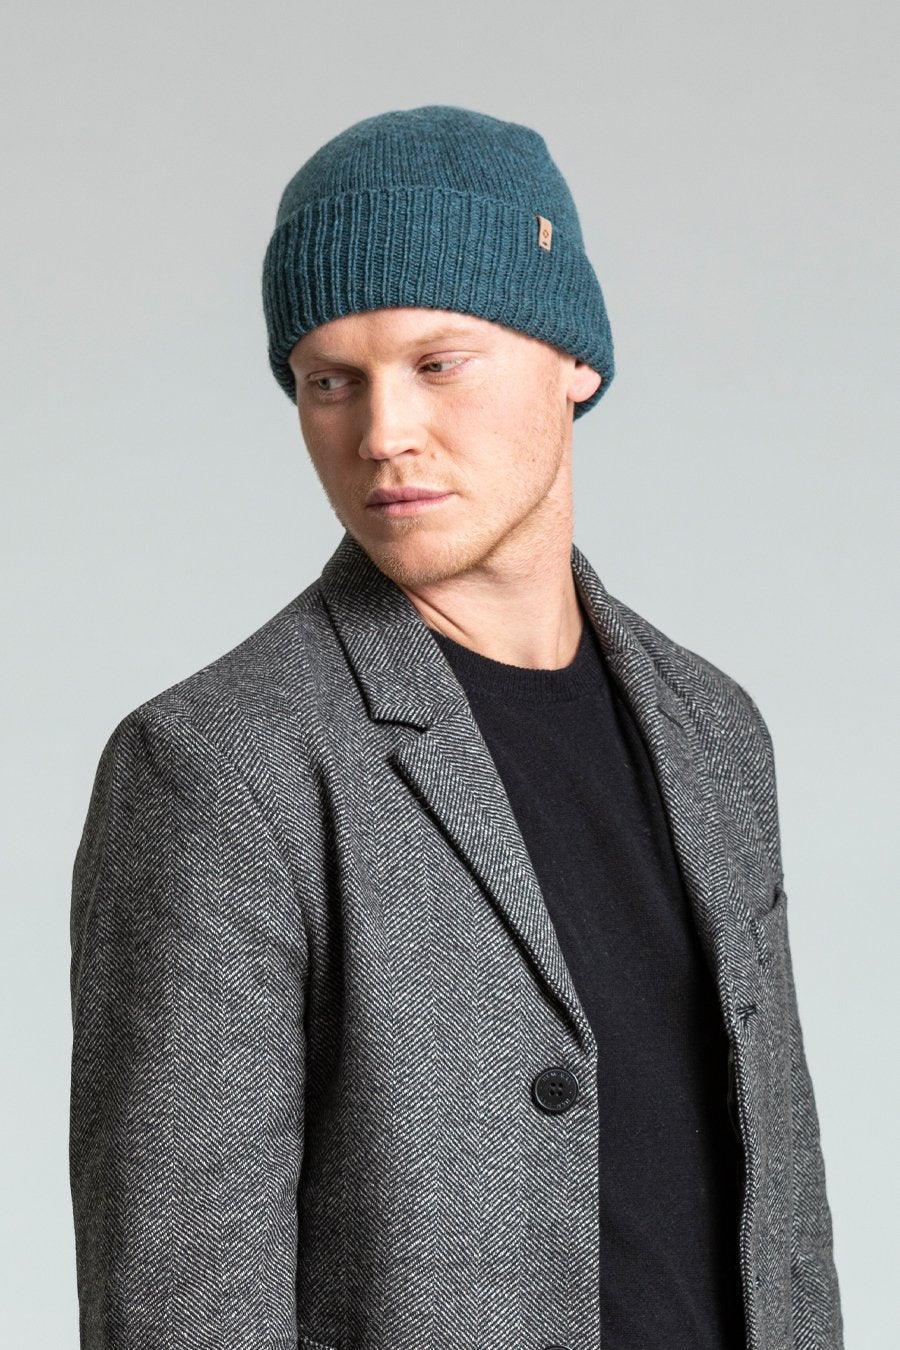 Merino Cuffed Hat - Ethical Trade Co